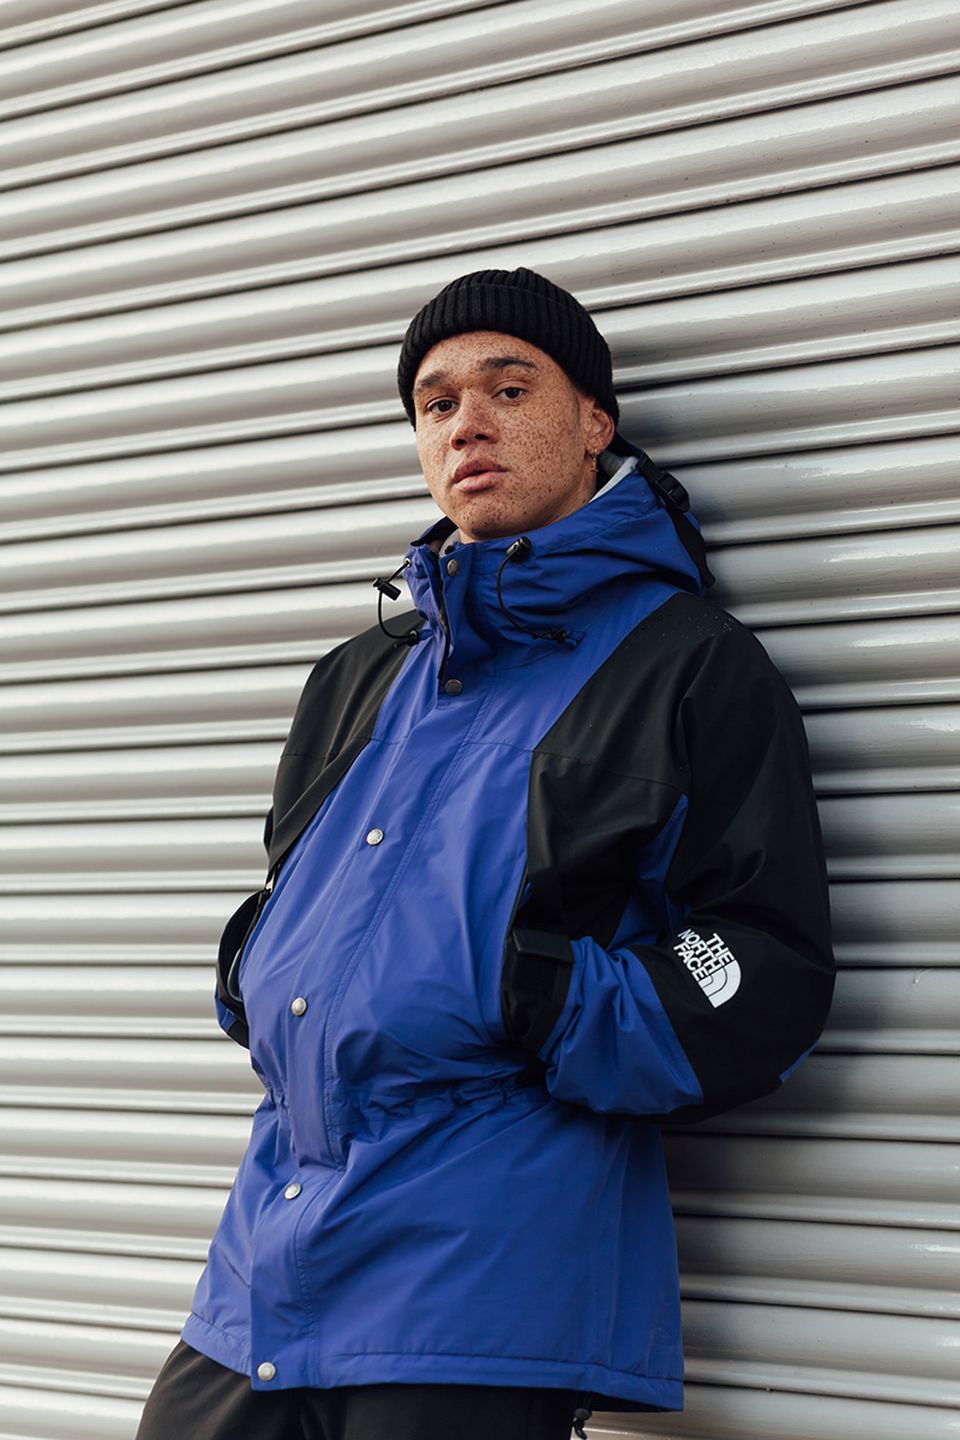 The North Face's Latest Jacket Is An Iconic ‘90s Revival